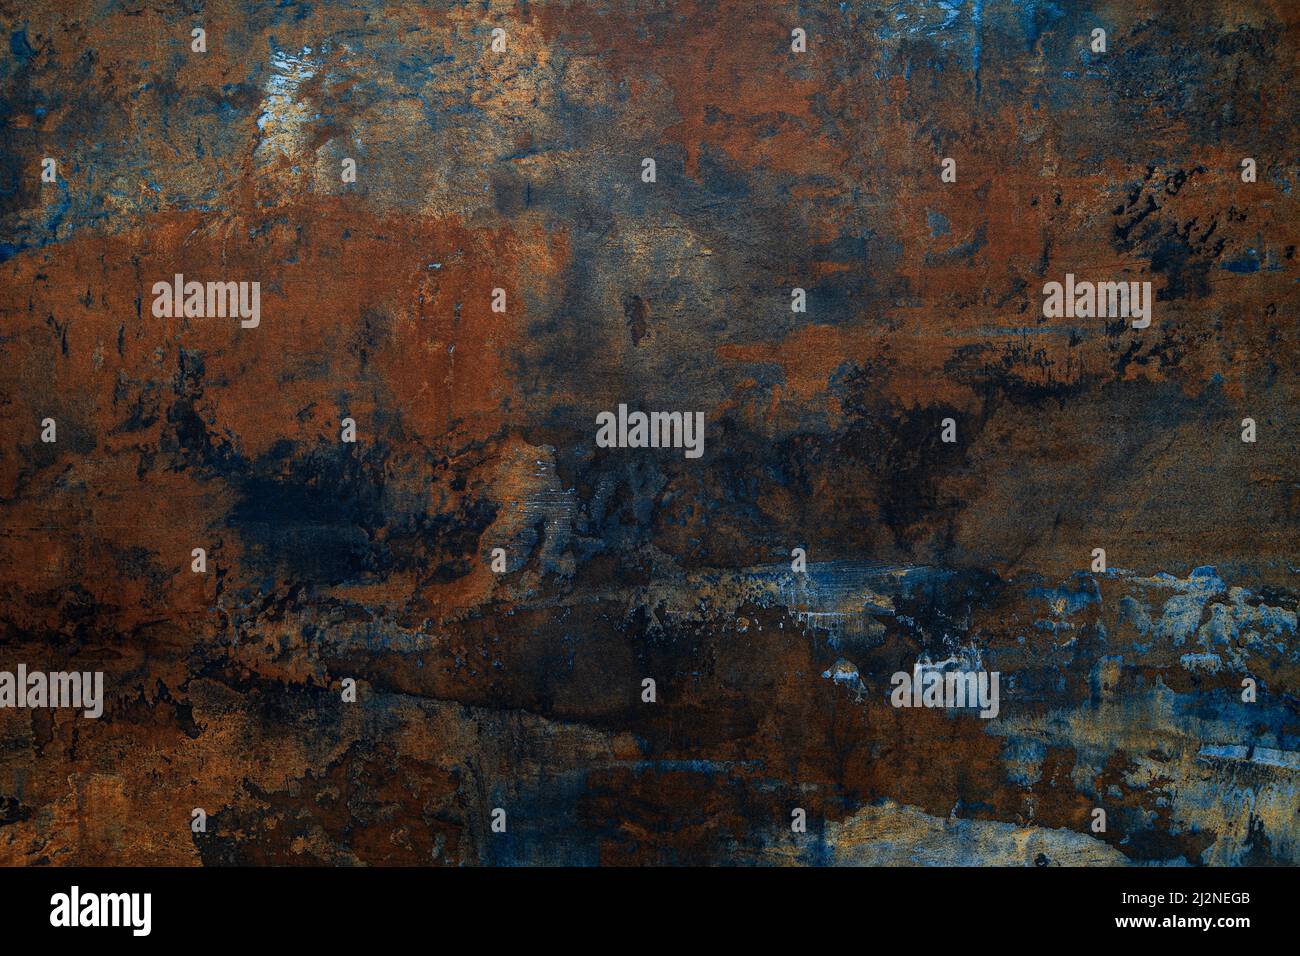 Abstract Art Texture Background. Blue and dark orange old cracked wall surface. Grunge Texture. Stock Photo